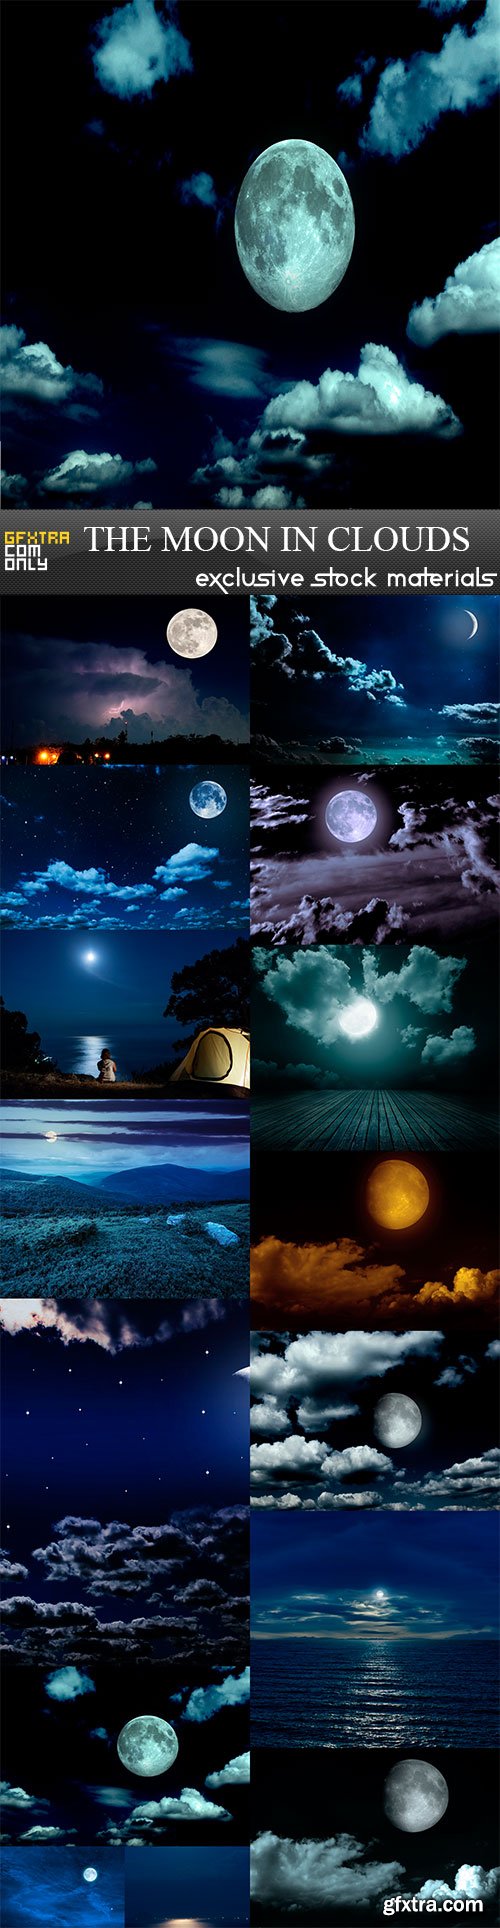 The moon in the night sky in clouds, 15 x UHQ JPEG